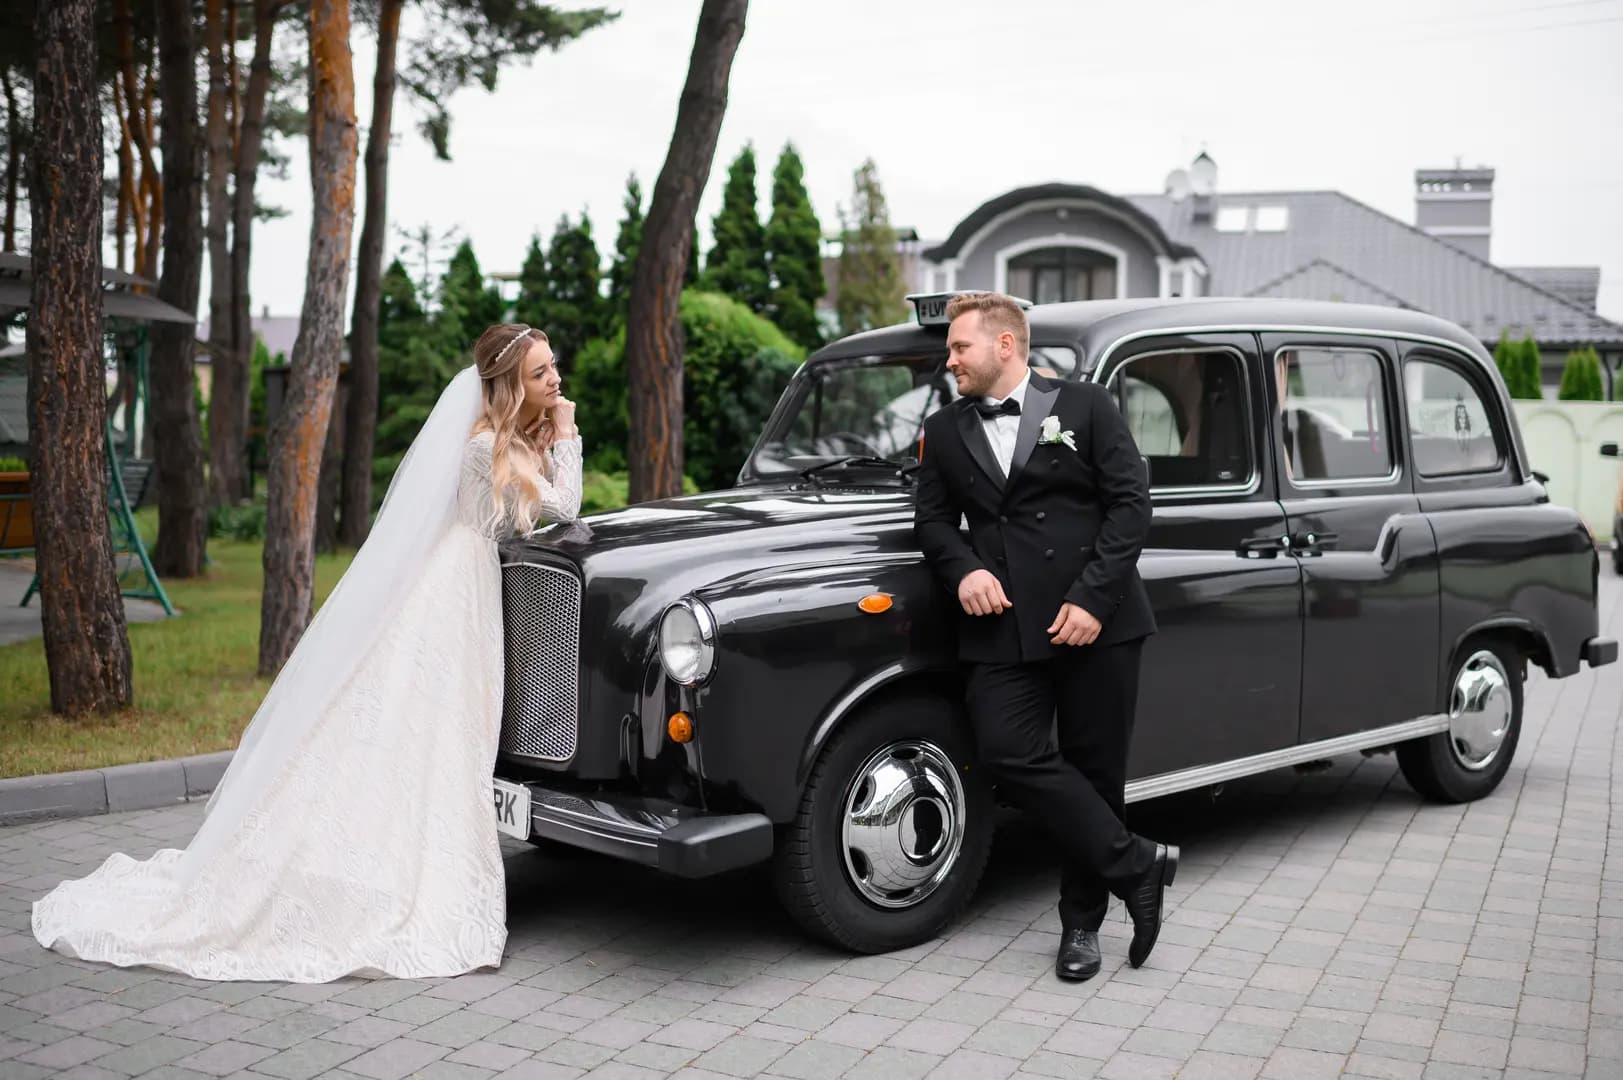 Wedding Car Hire in Essendon, Make Your Special Day Unforgettable